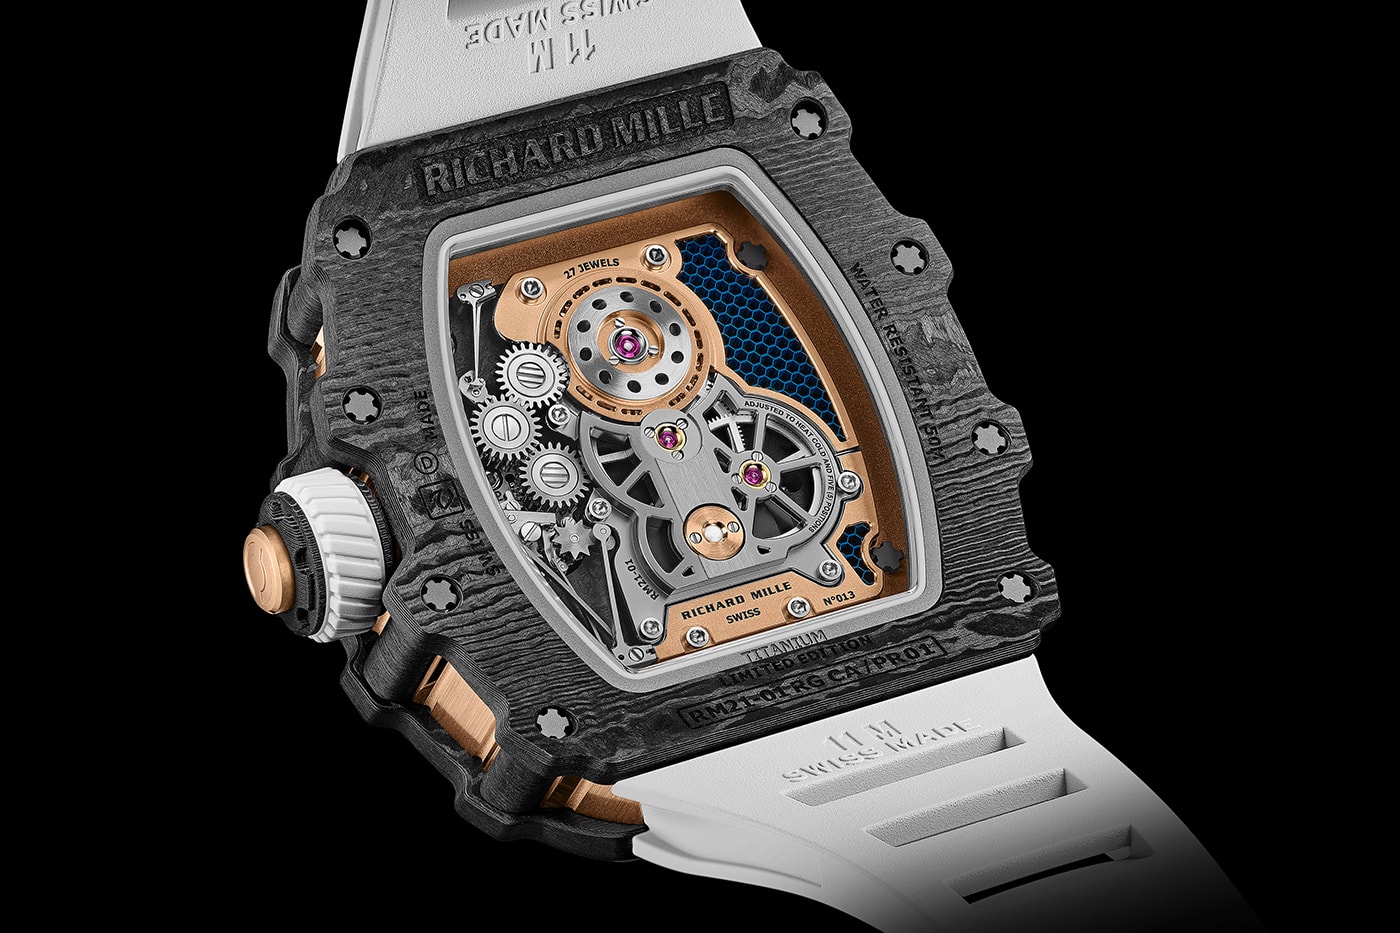 Richard Mille RM 21-01 TOURBILLON AERODYNE info HAYNES 214 Carbon TPE Red Gold Luxury watches swiss watches racing expensive 